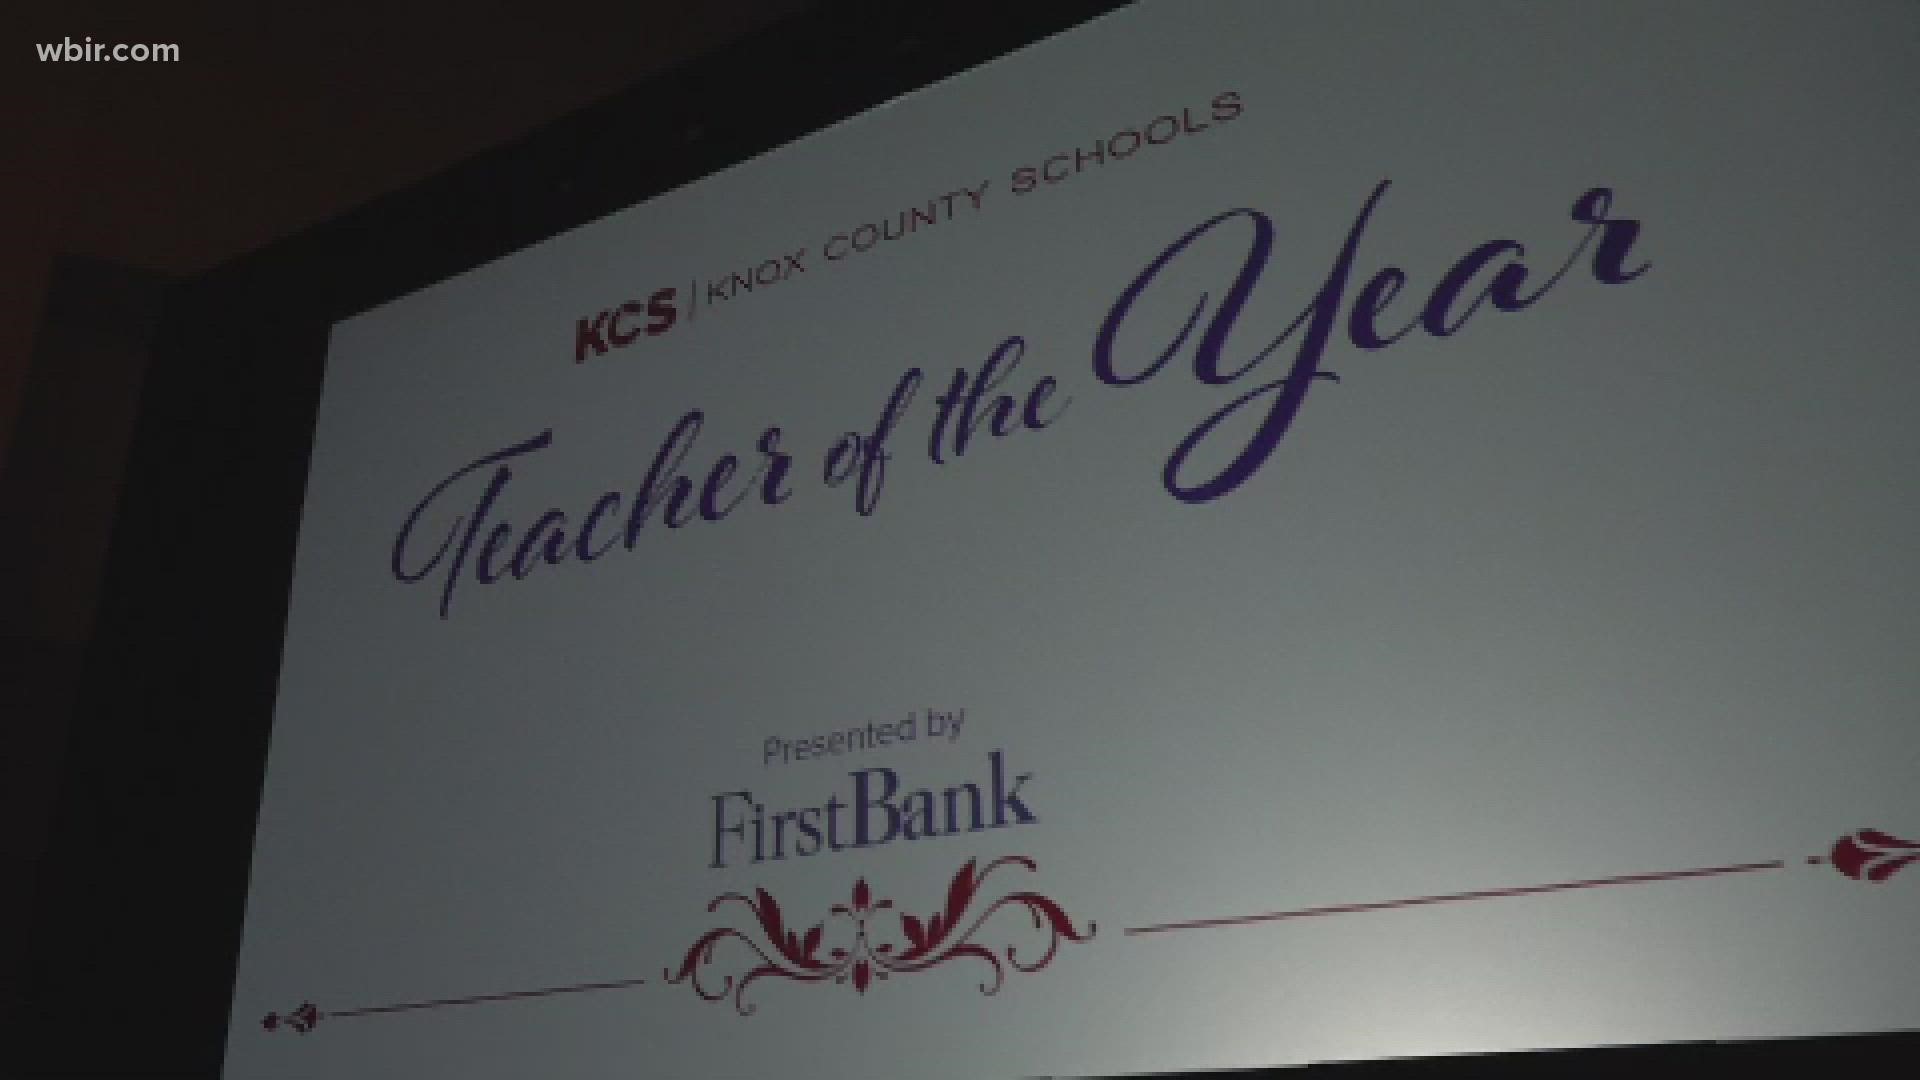 Nearly 200 teachers received an award, after teaching through a pandemic and staying strong despite grueling challenges.